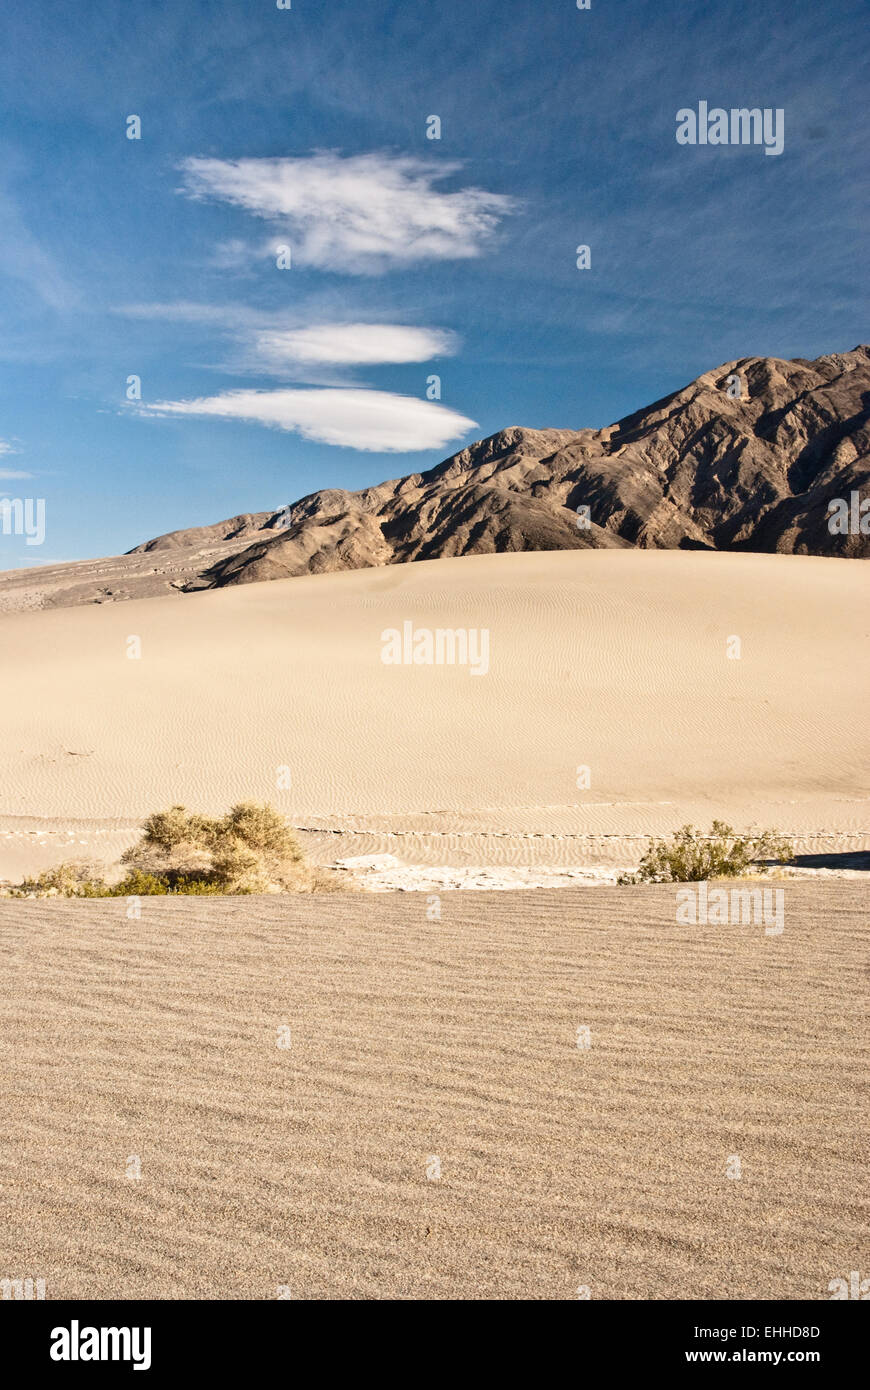 Stovepipe Wells, Death Valley Stock Photo - Alamy